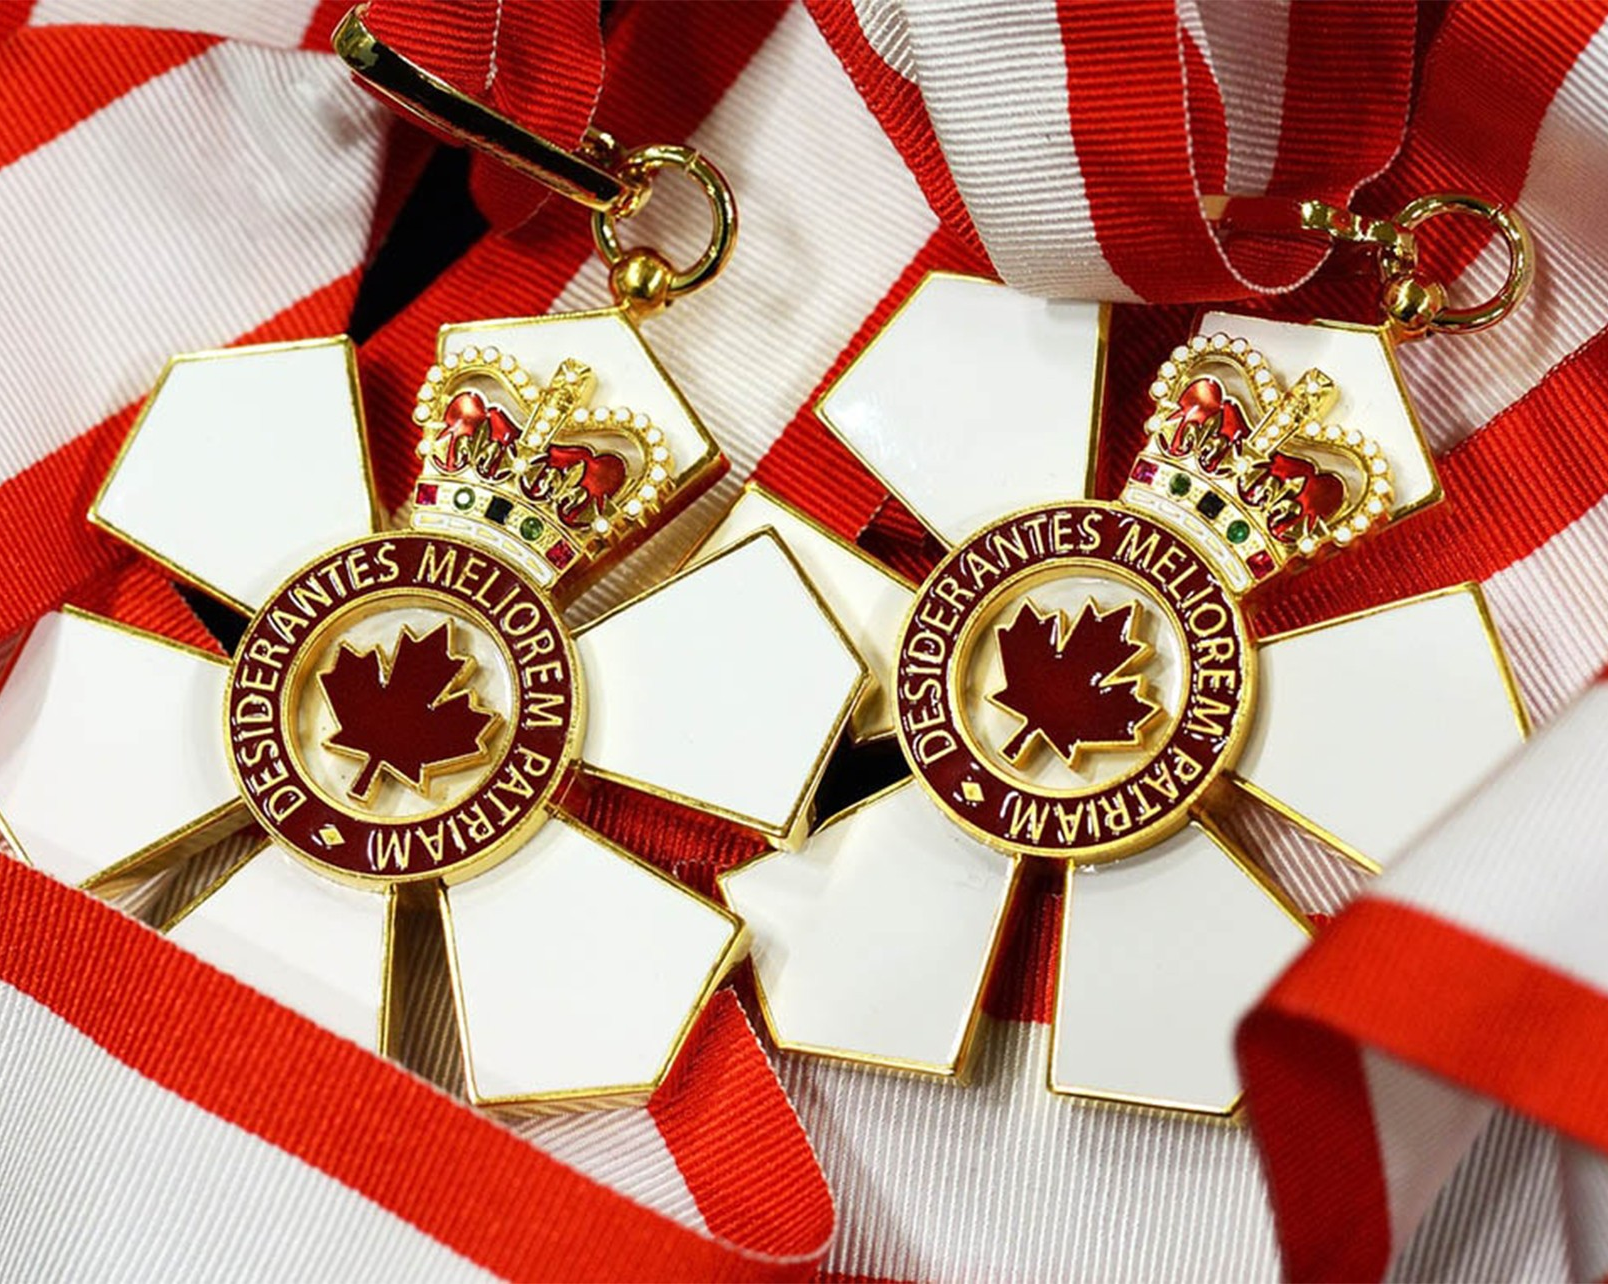 8 Concordians among newest Order of Canada honourees